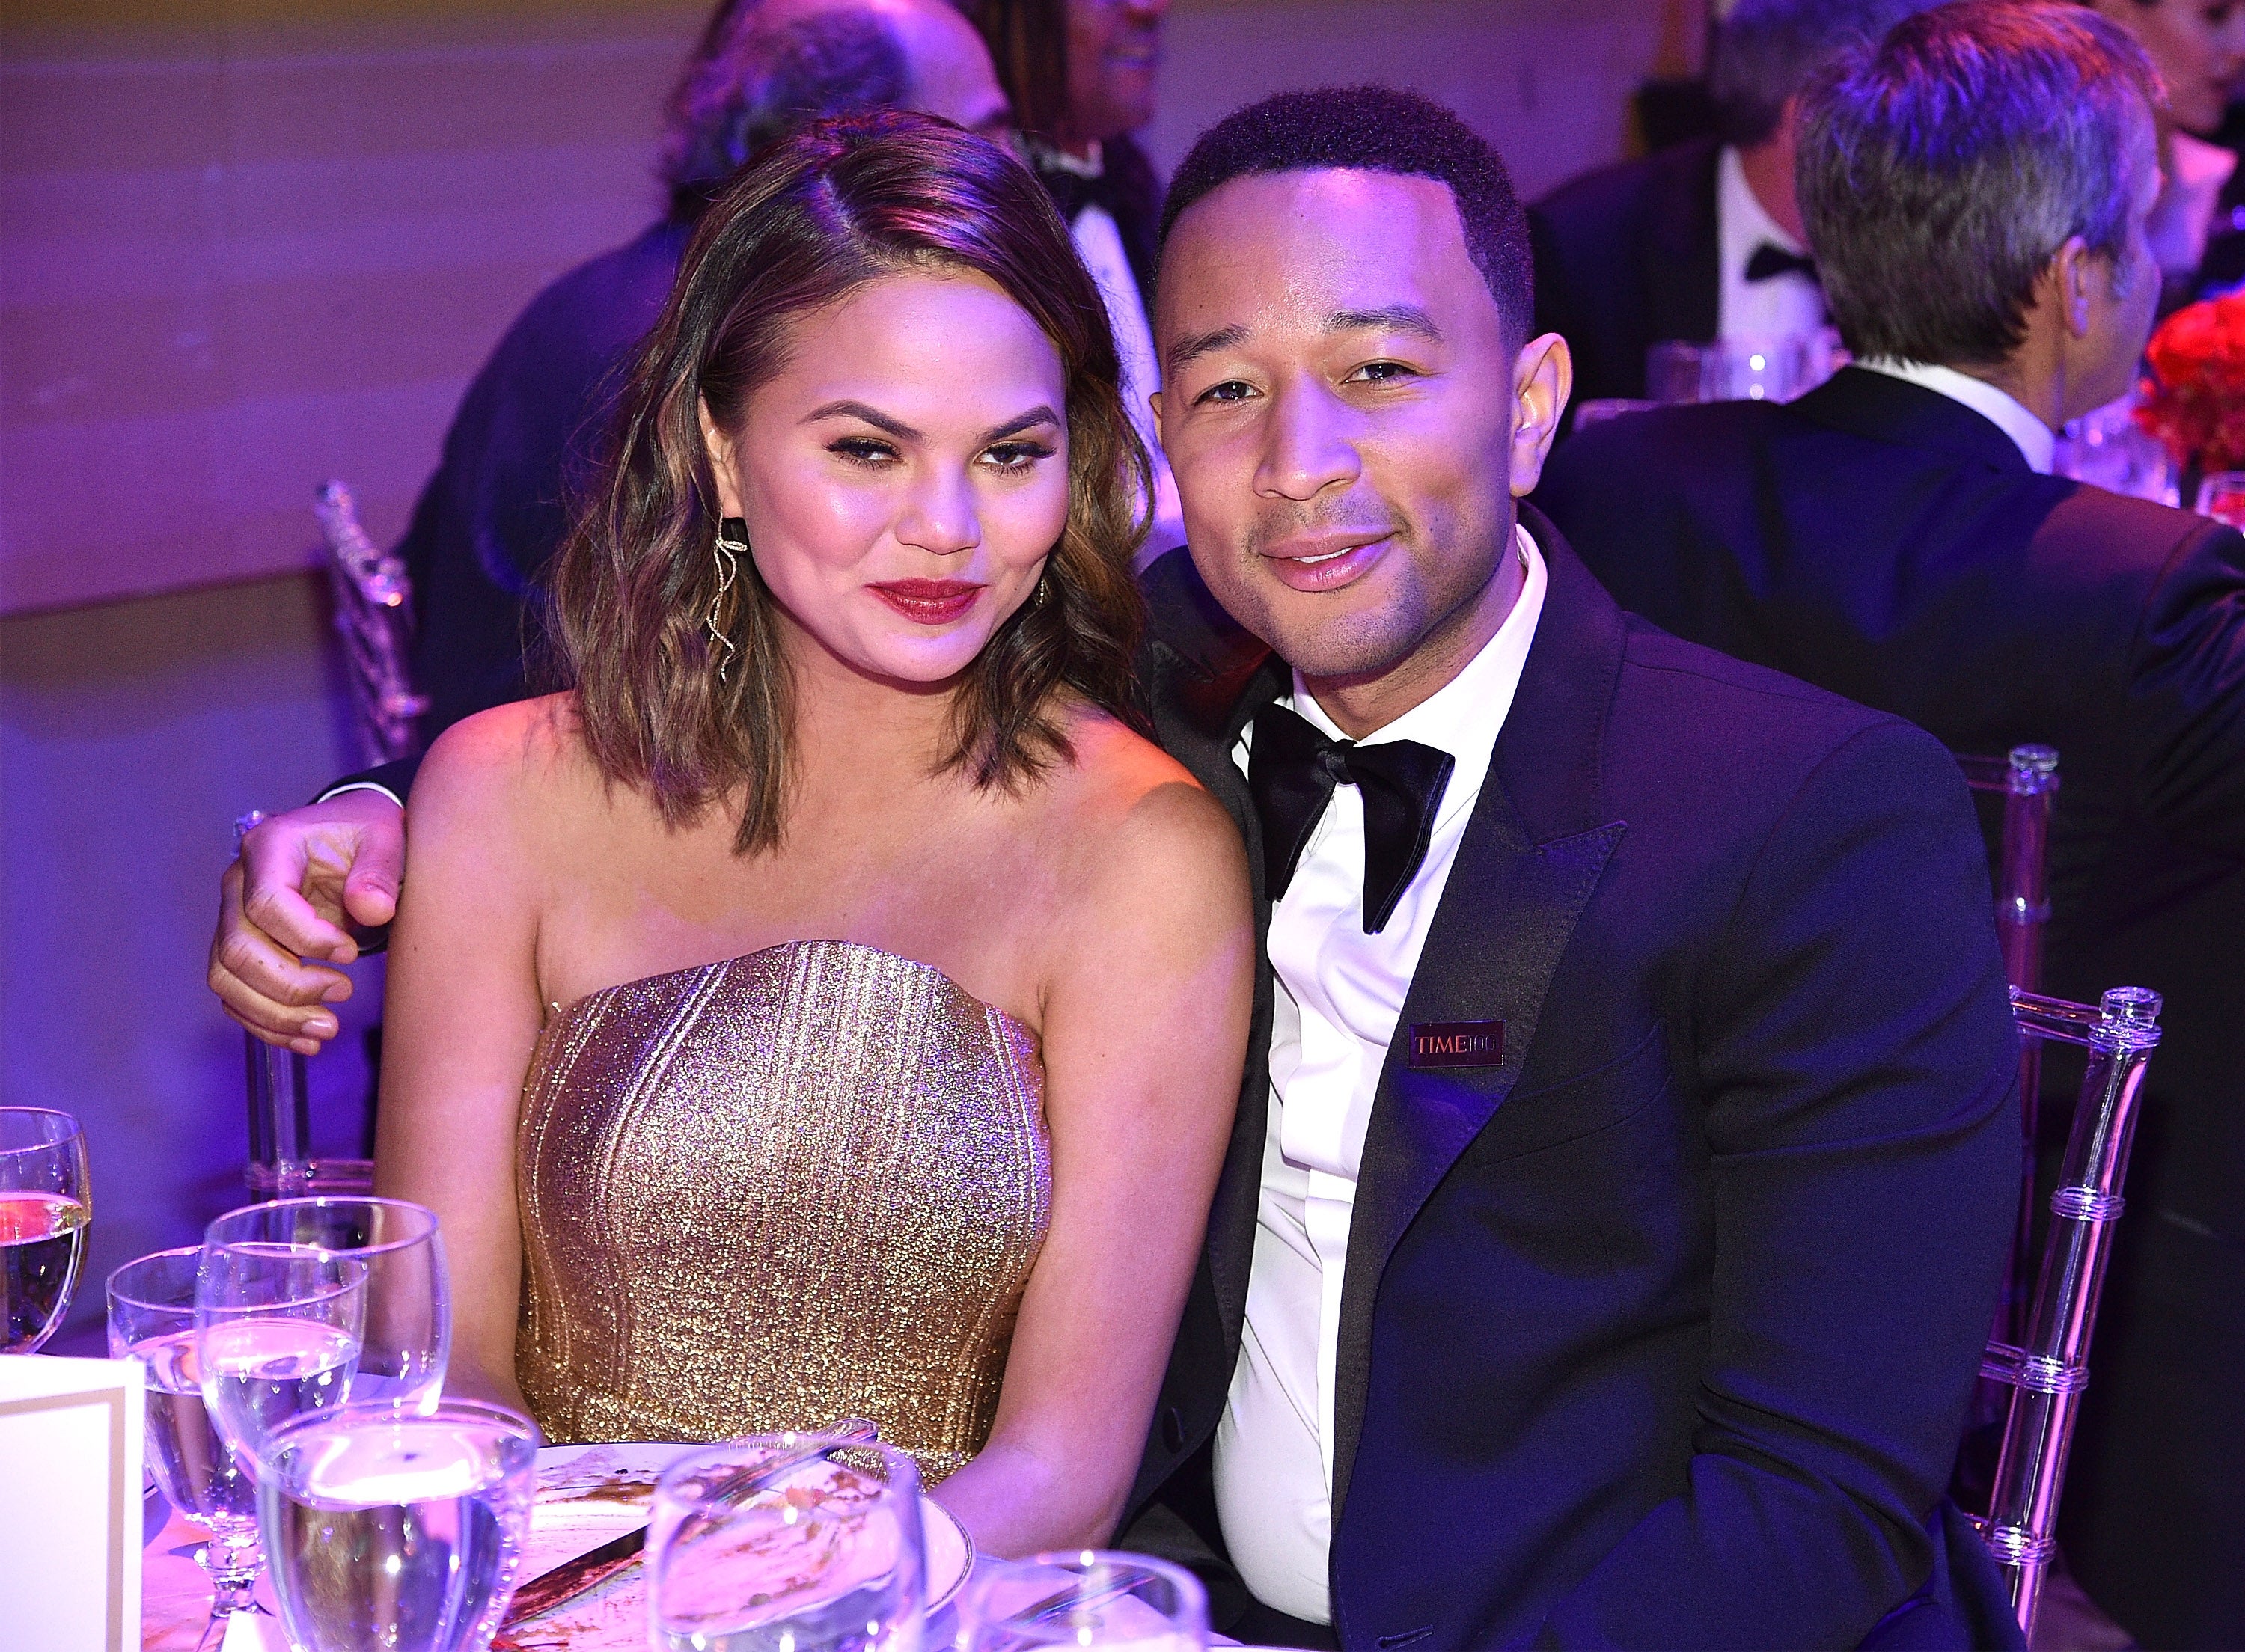 Chrissy Teigen On That Time John Legend Tried To Break Up With Her: 'He Was Being A Whiny Face'
